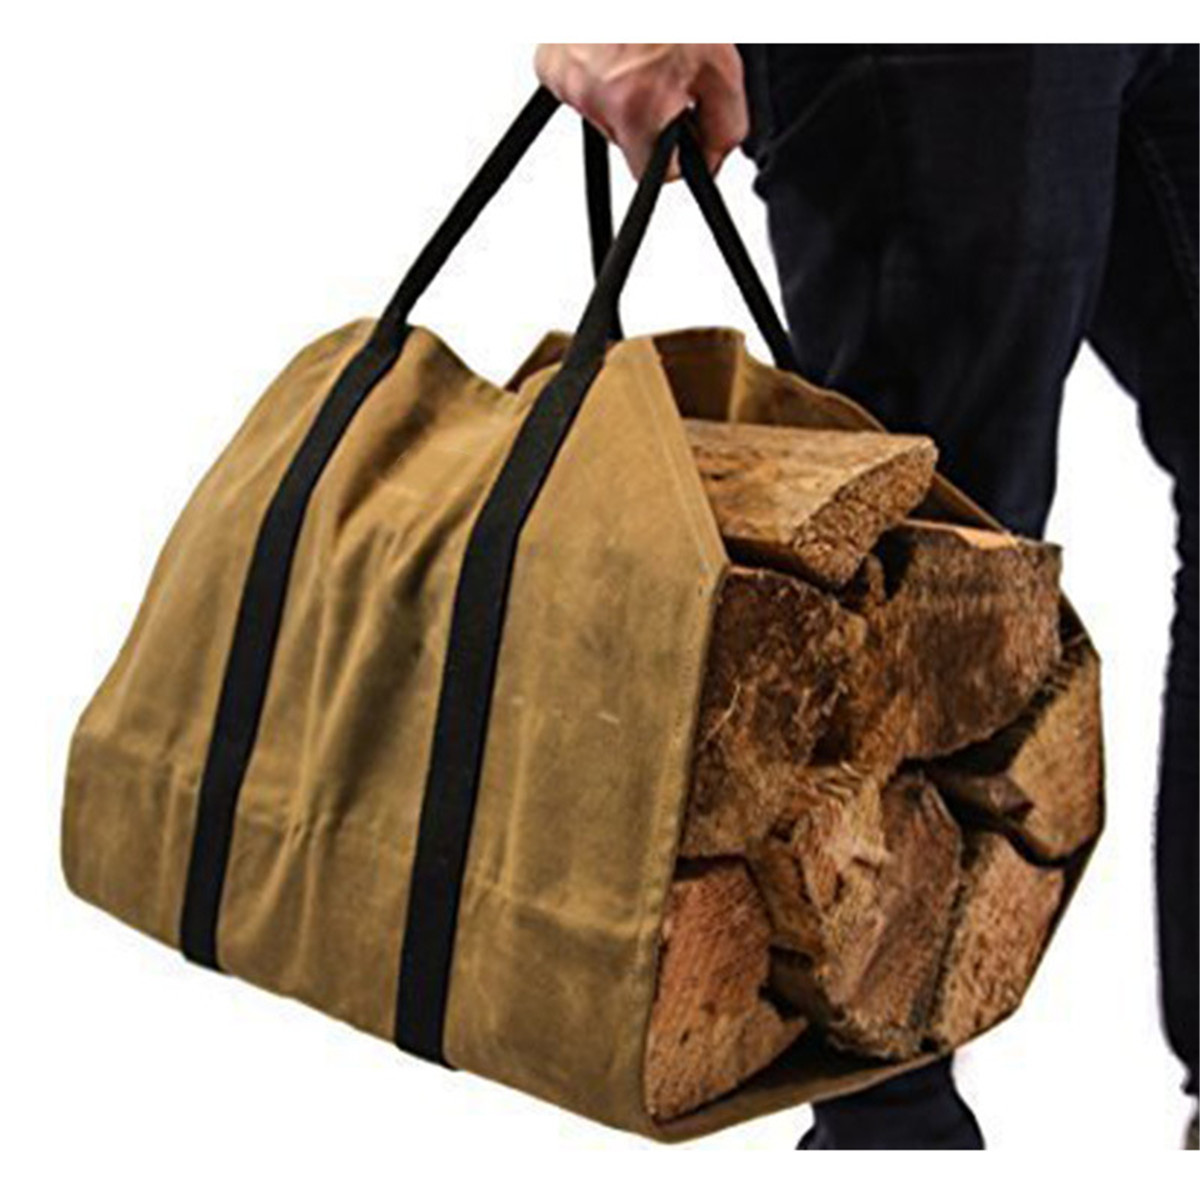 khaki-Firewood-Carrier-Log-Carrier-Wood-Carrying-Tool-Bag-for-Fireplace-Waxed-Canvas-1388831-3